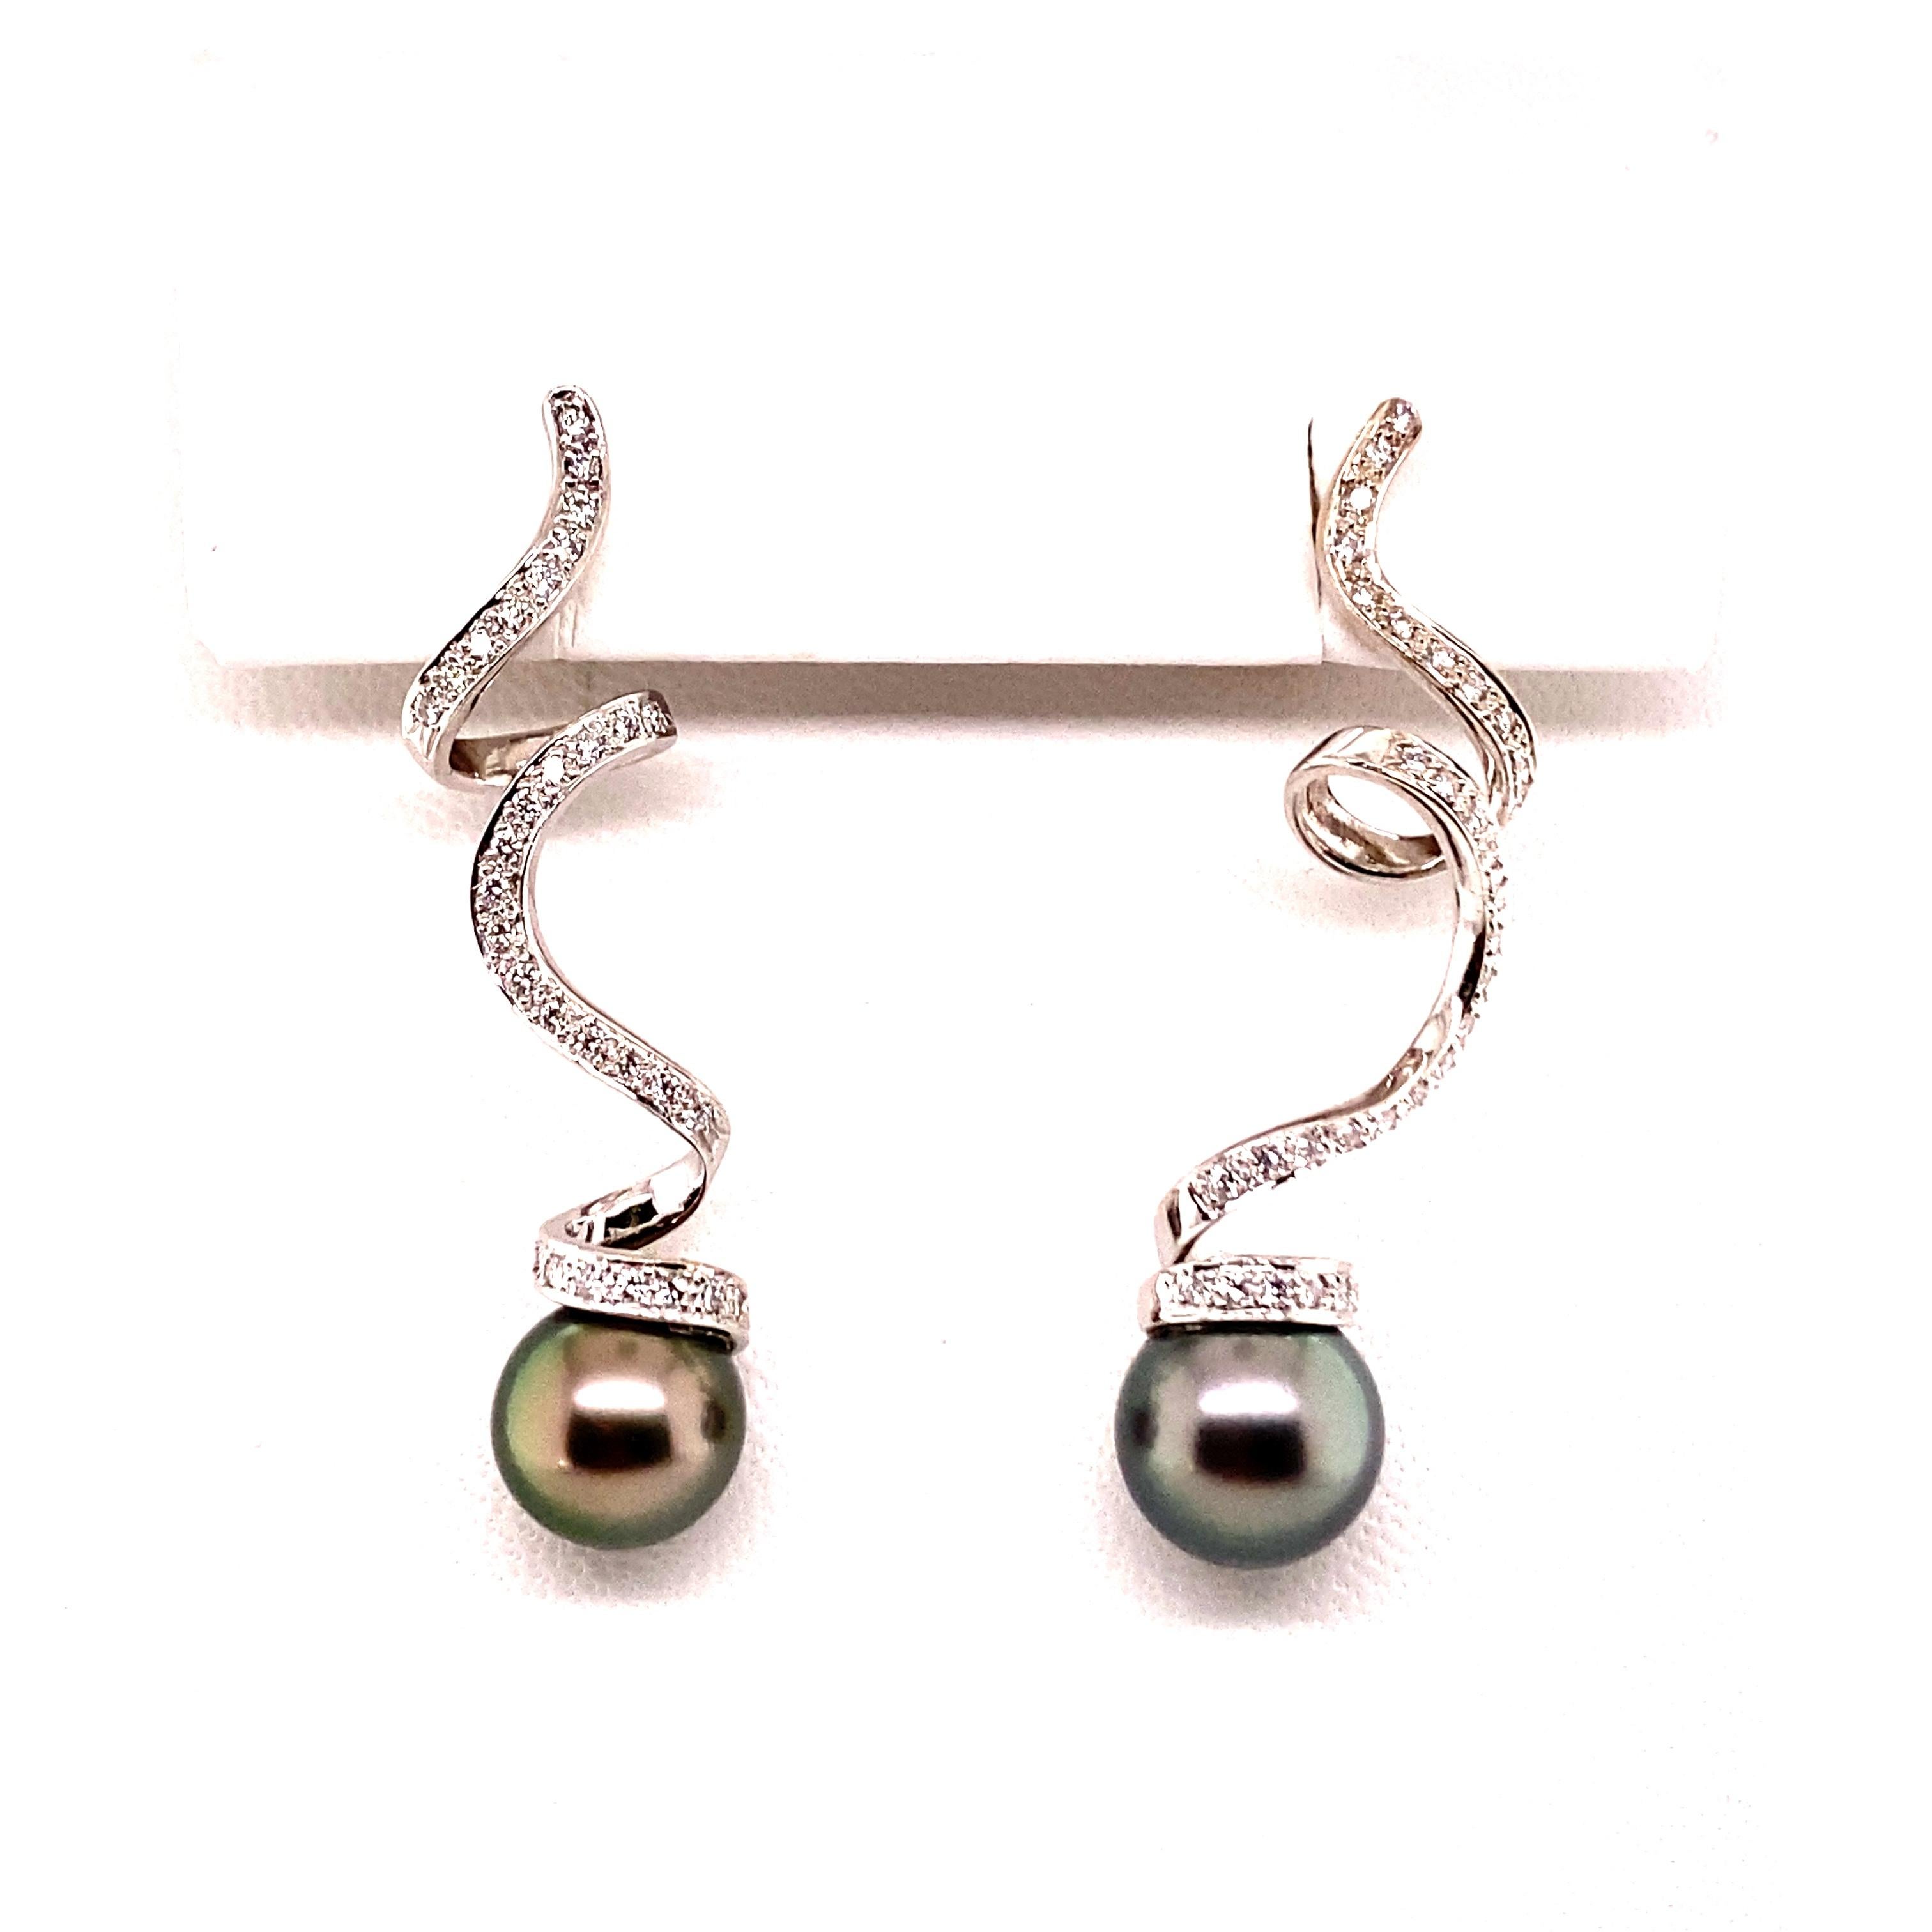 These playful earstuds in 18 karat white gold give the impression that the two round, beautiful tahitian pearls are attached to festively curly ribbons, set with 66 brilliant-cut diamonds of G/H colour and vs clarity, total weight approximately 0.50